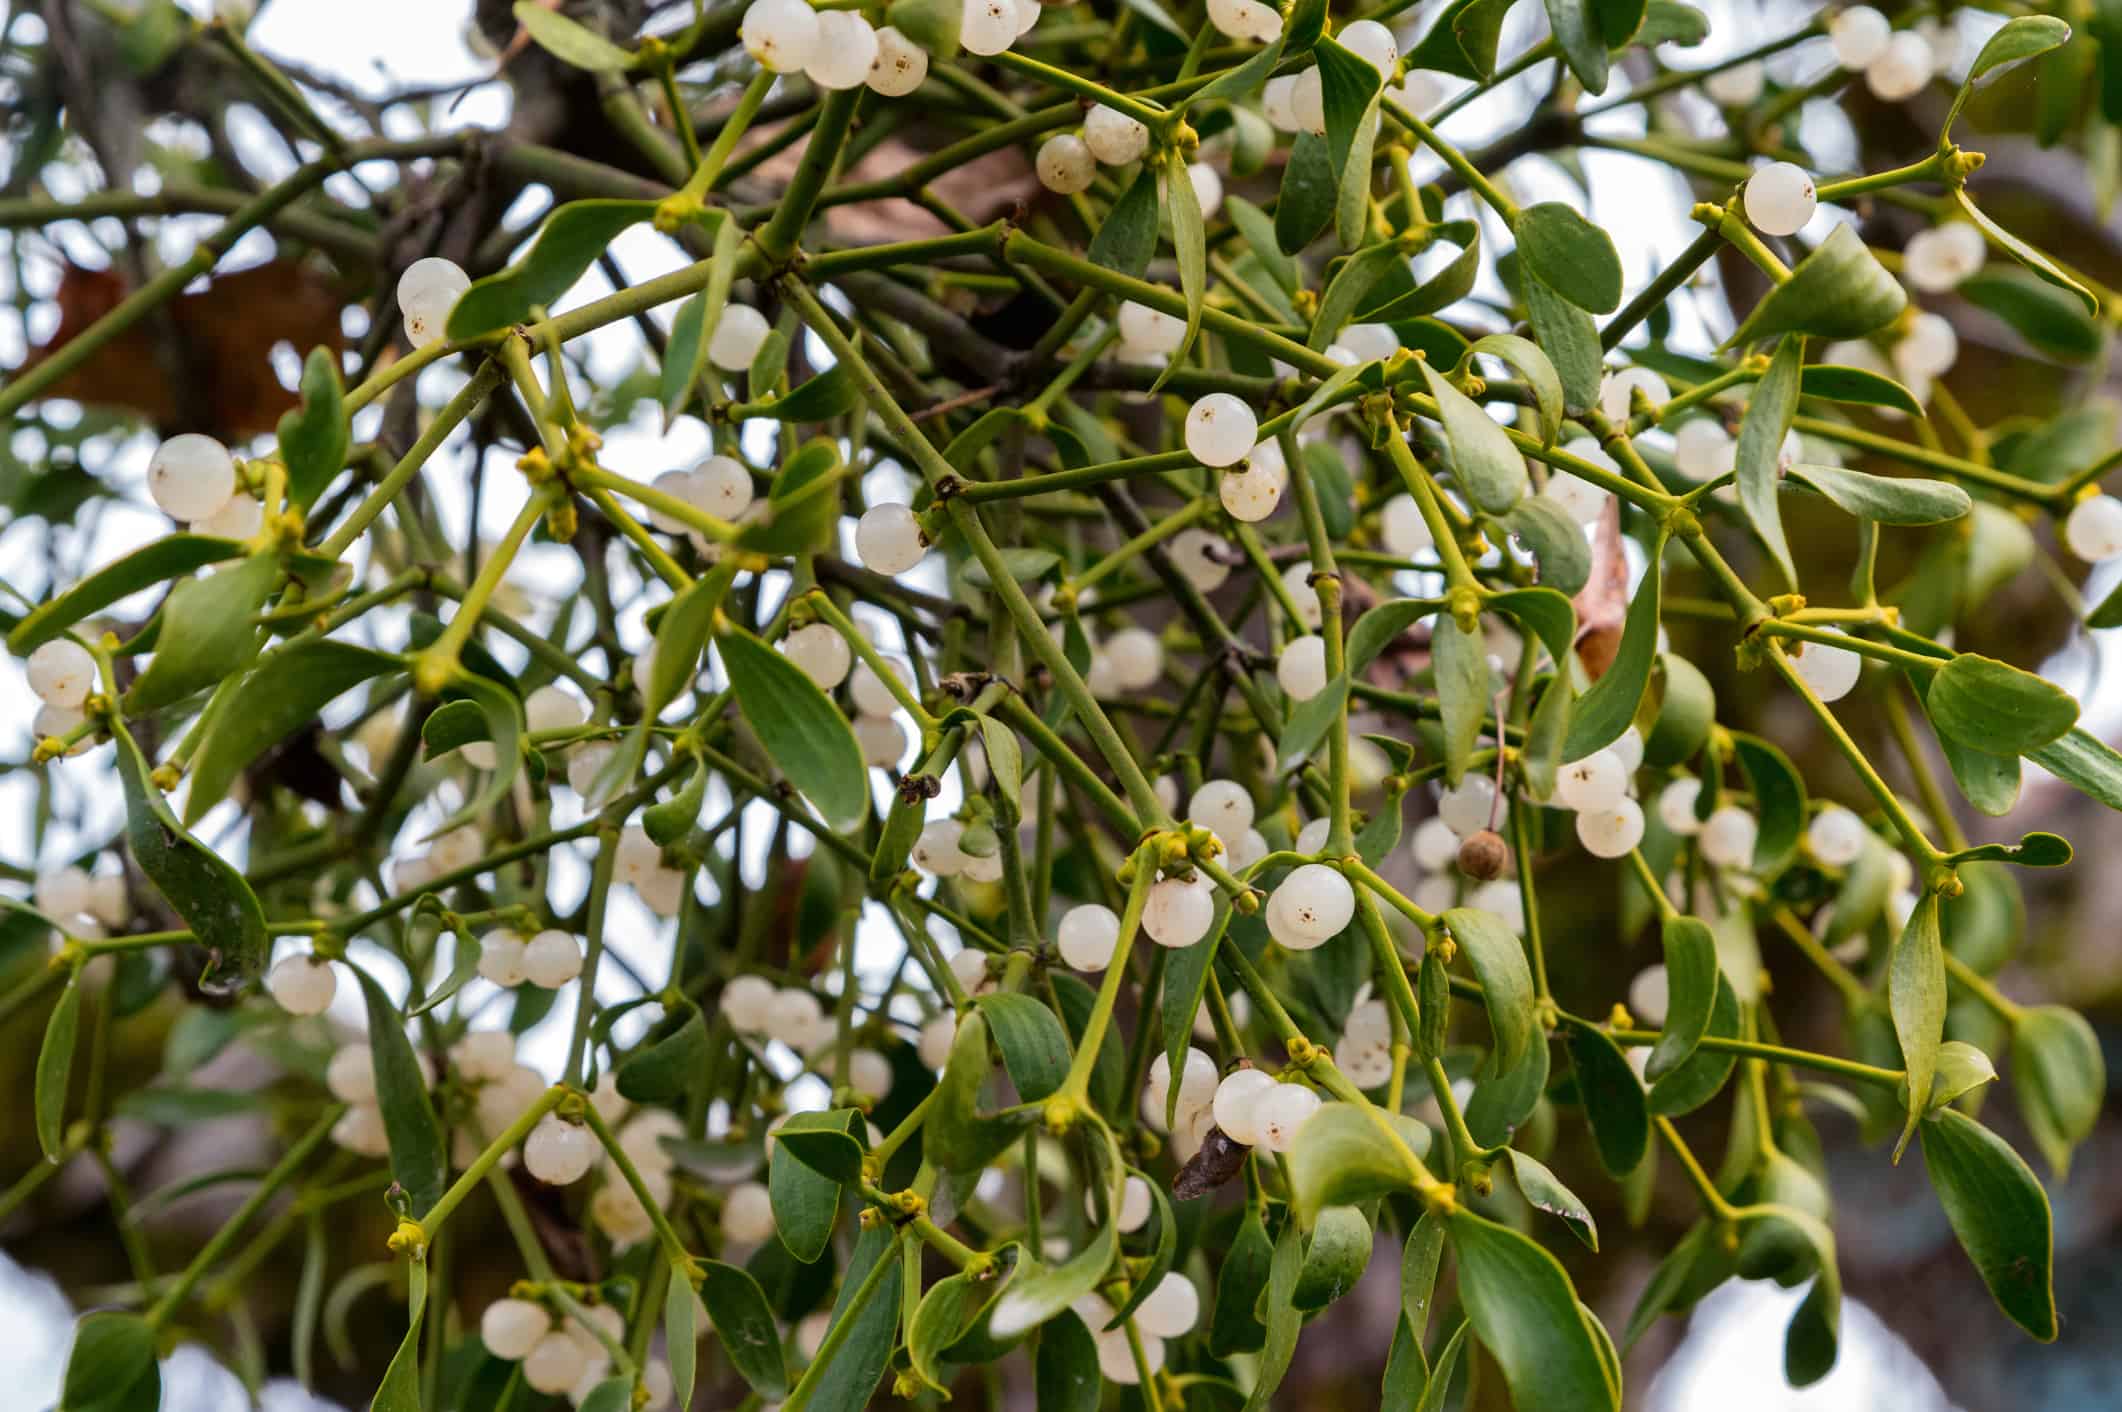 Branch of mistletoe or viscum with white fruits.